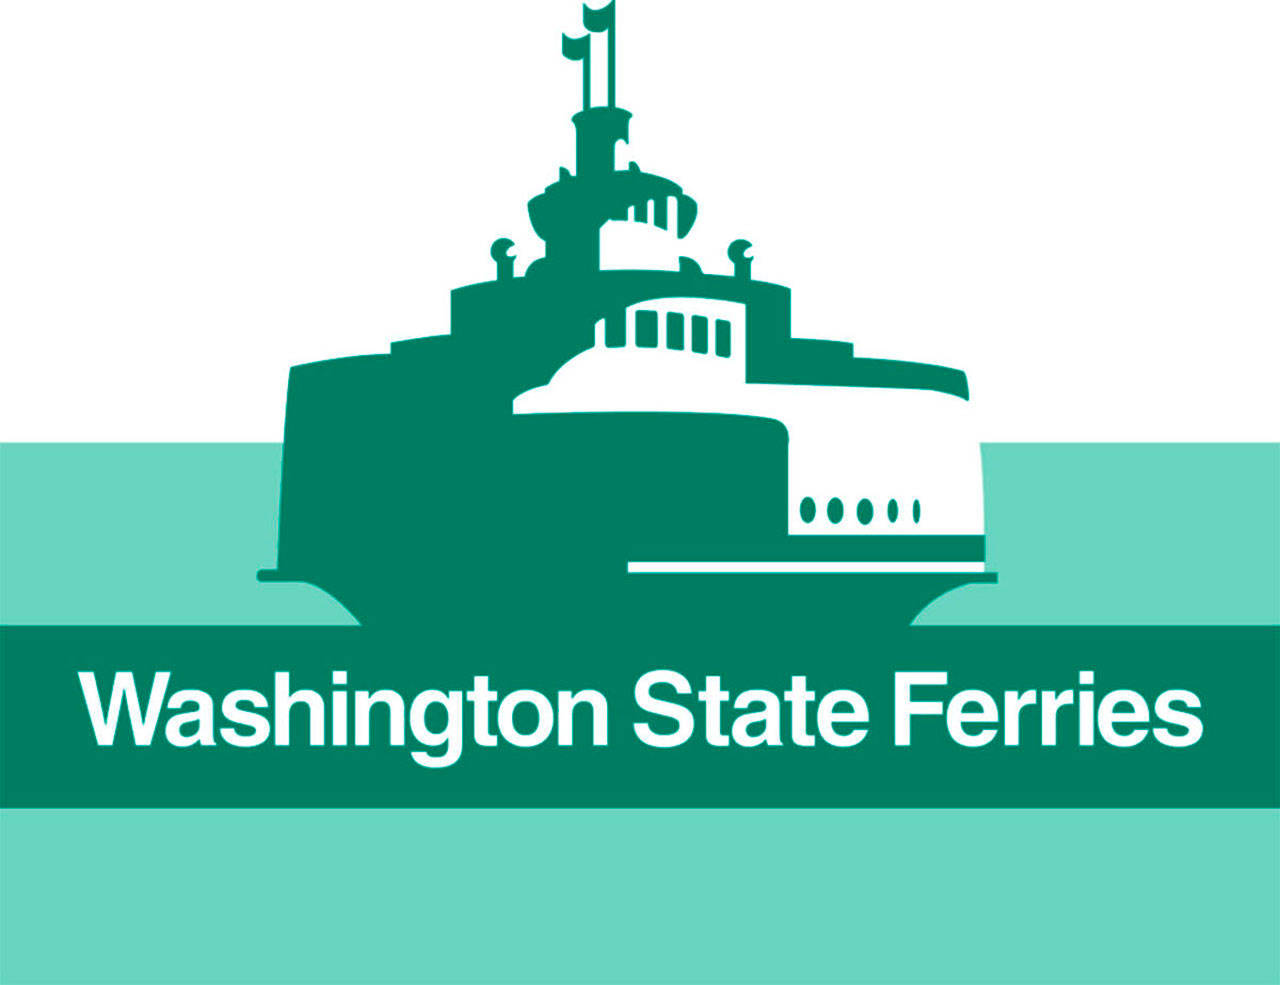 Transportation commission sets new ferry fares, makes changes to original proposal